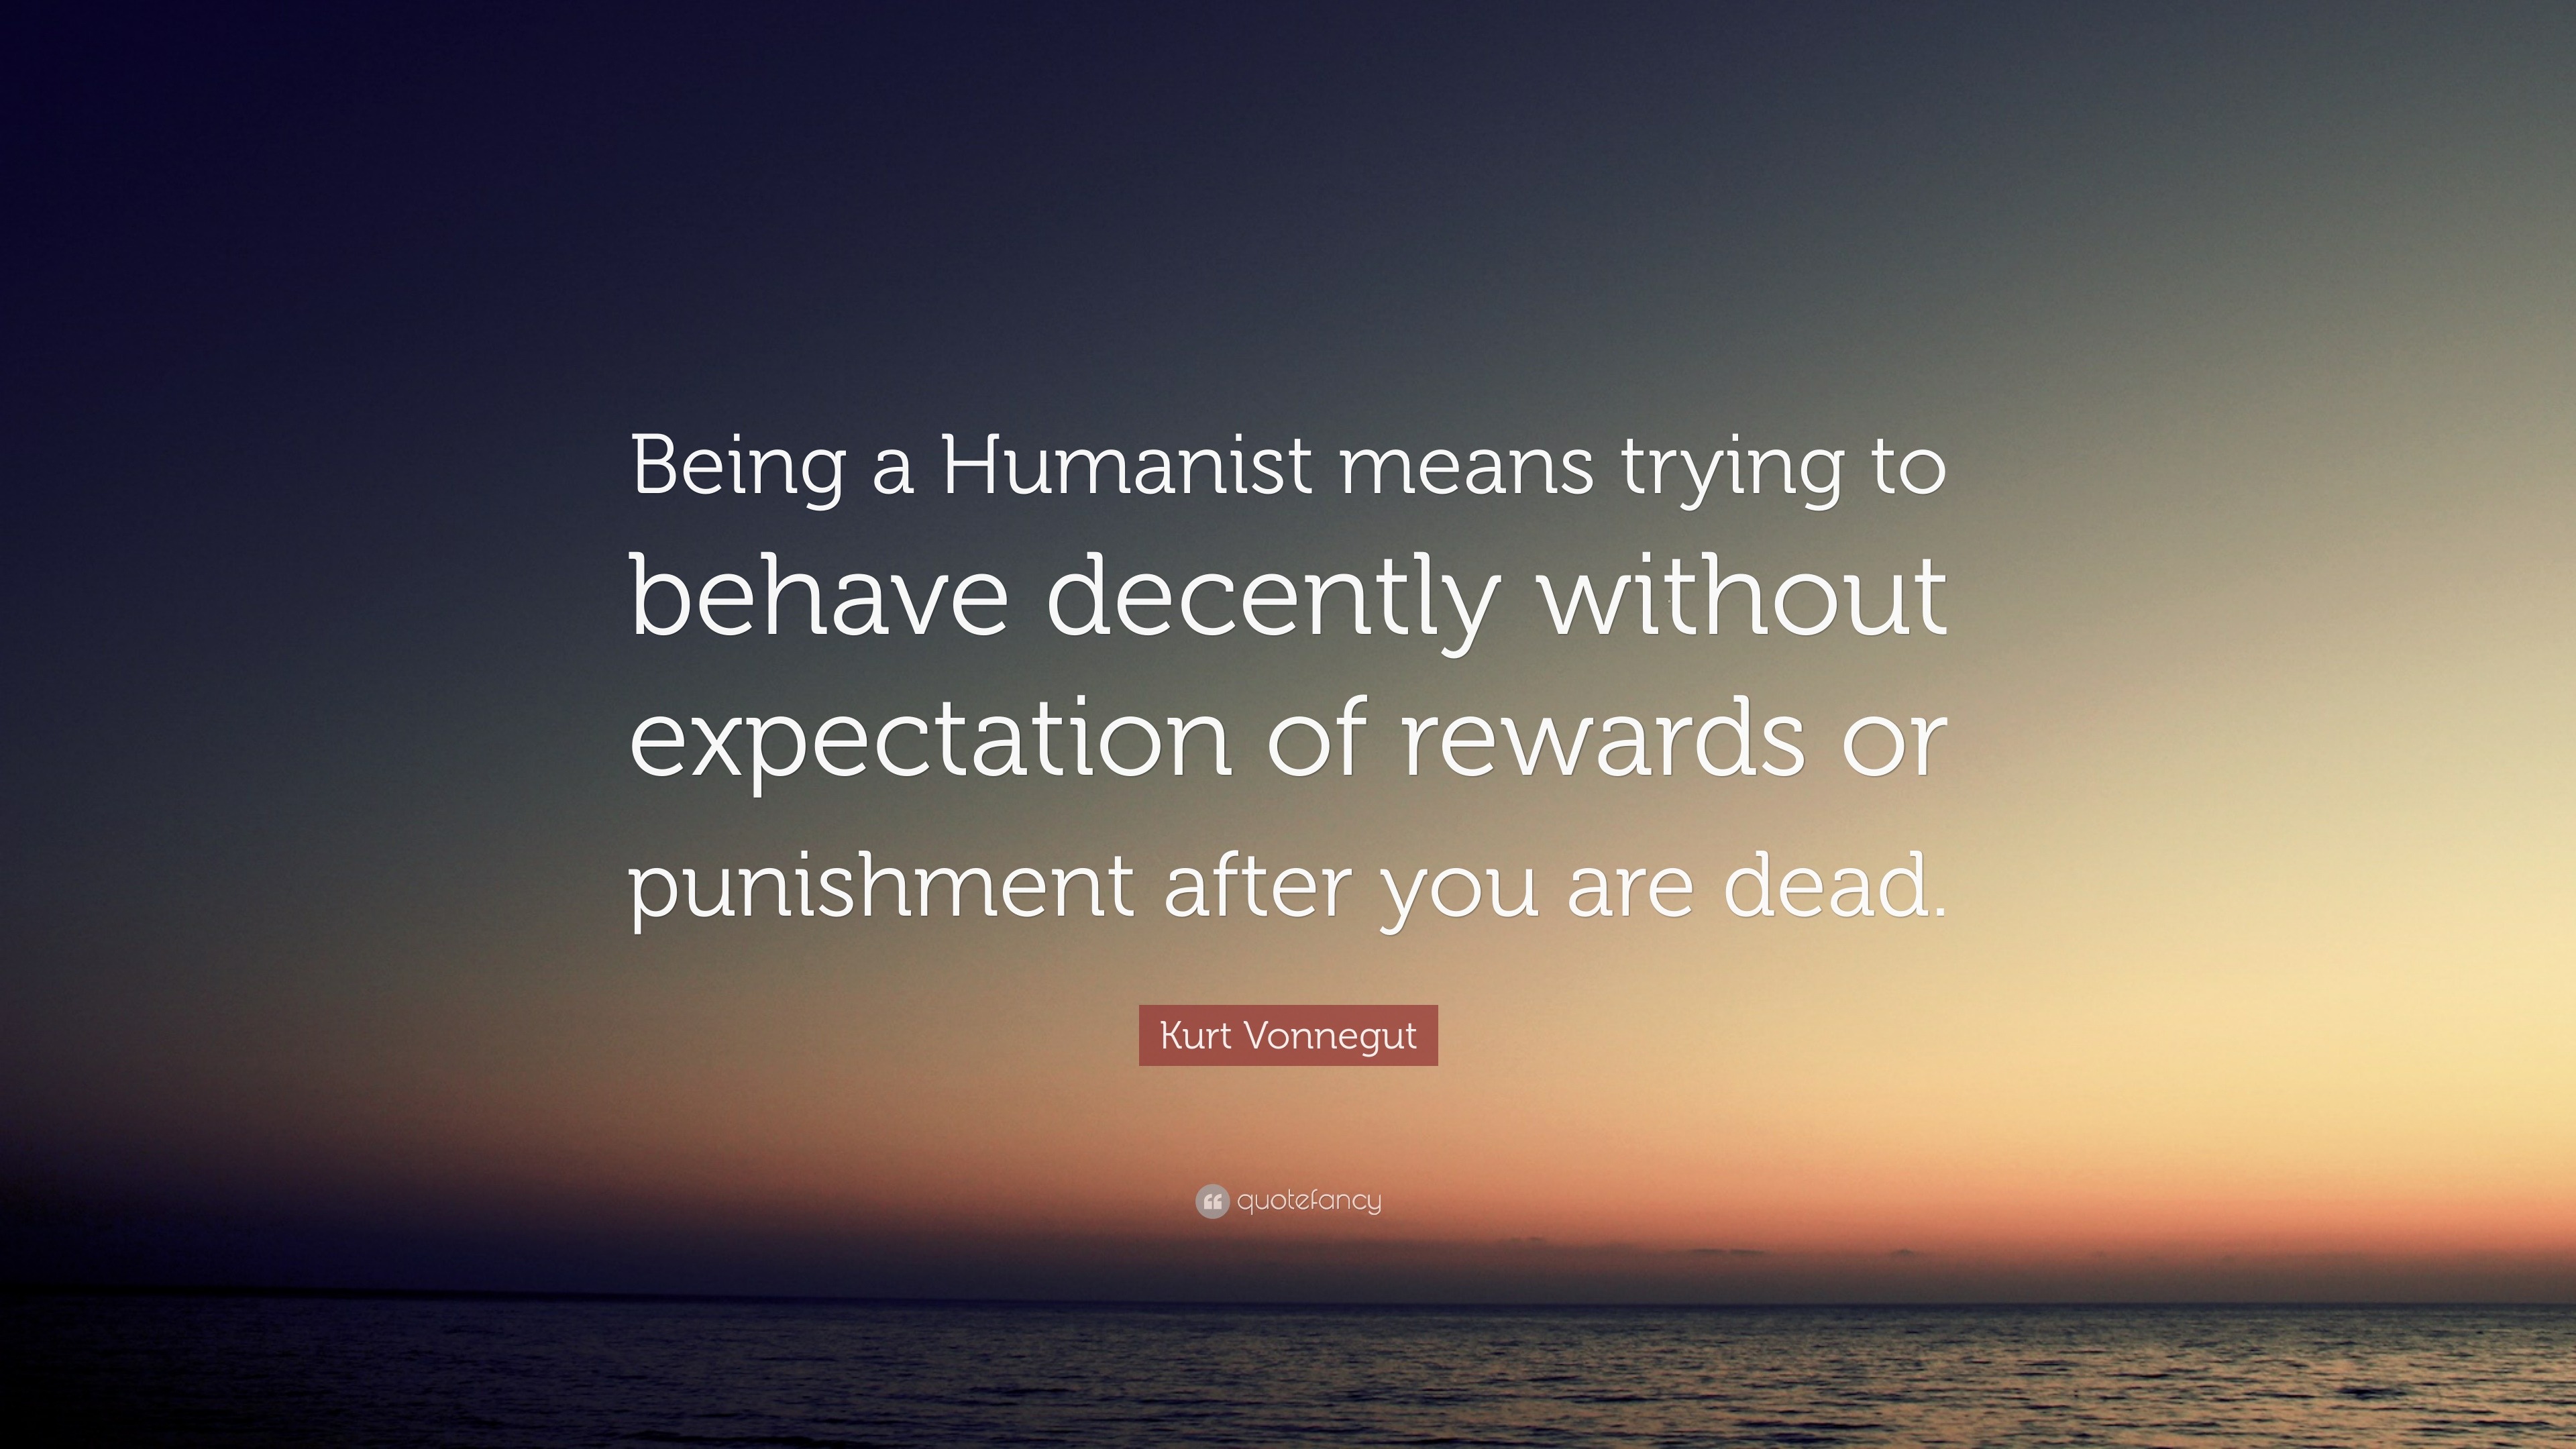 Kurt Vonnegut Quote: “Being a Humanist means trying to behave decently